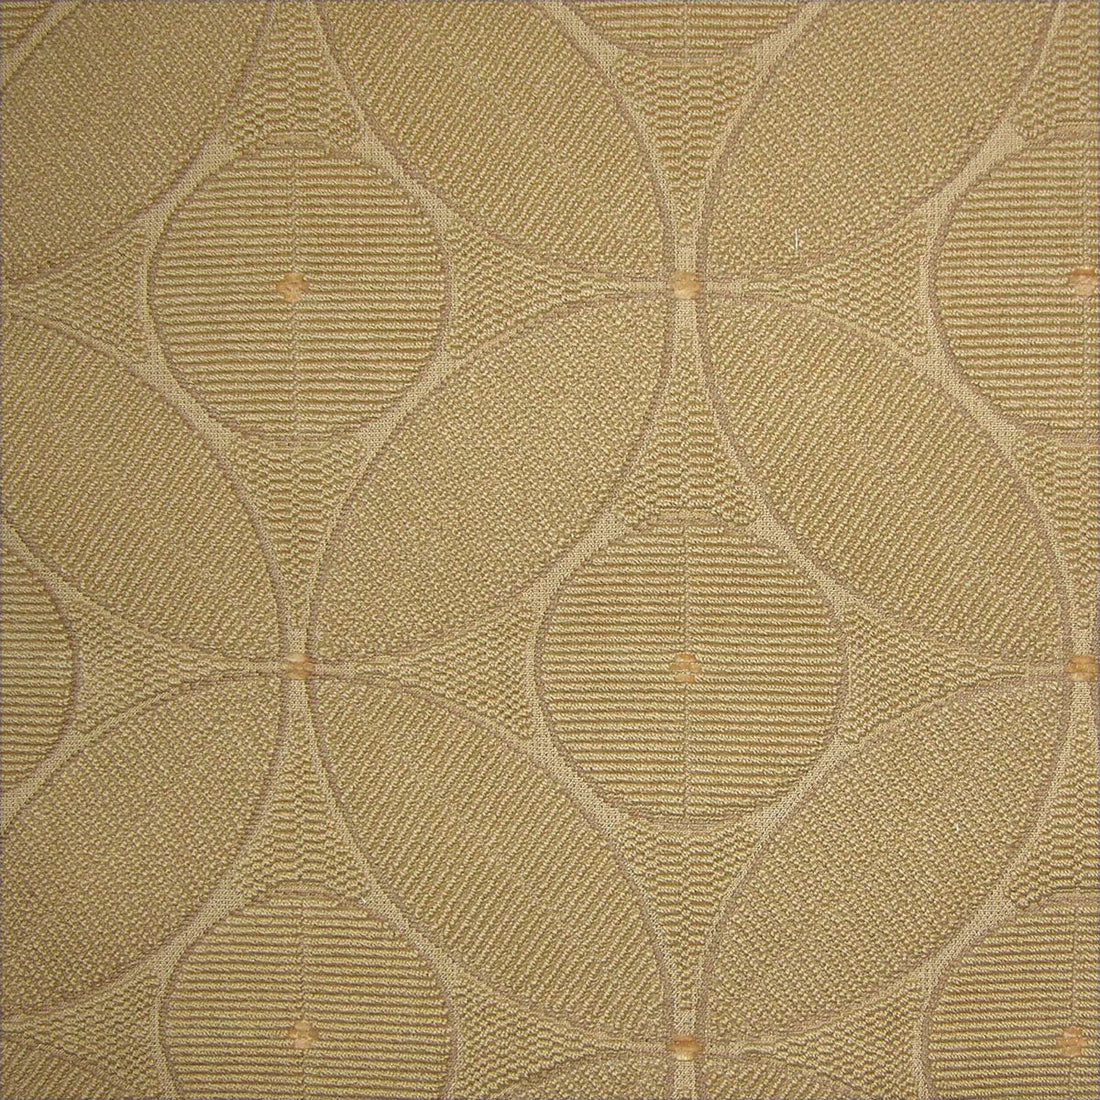 Geometry fabric in latte color - pattern number RH 00314509 - by Scalamandre in the Old World Weavers collection